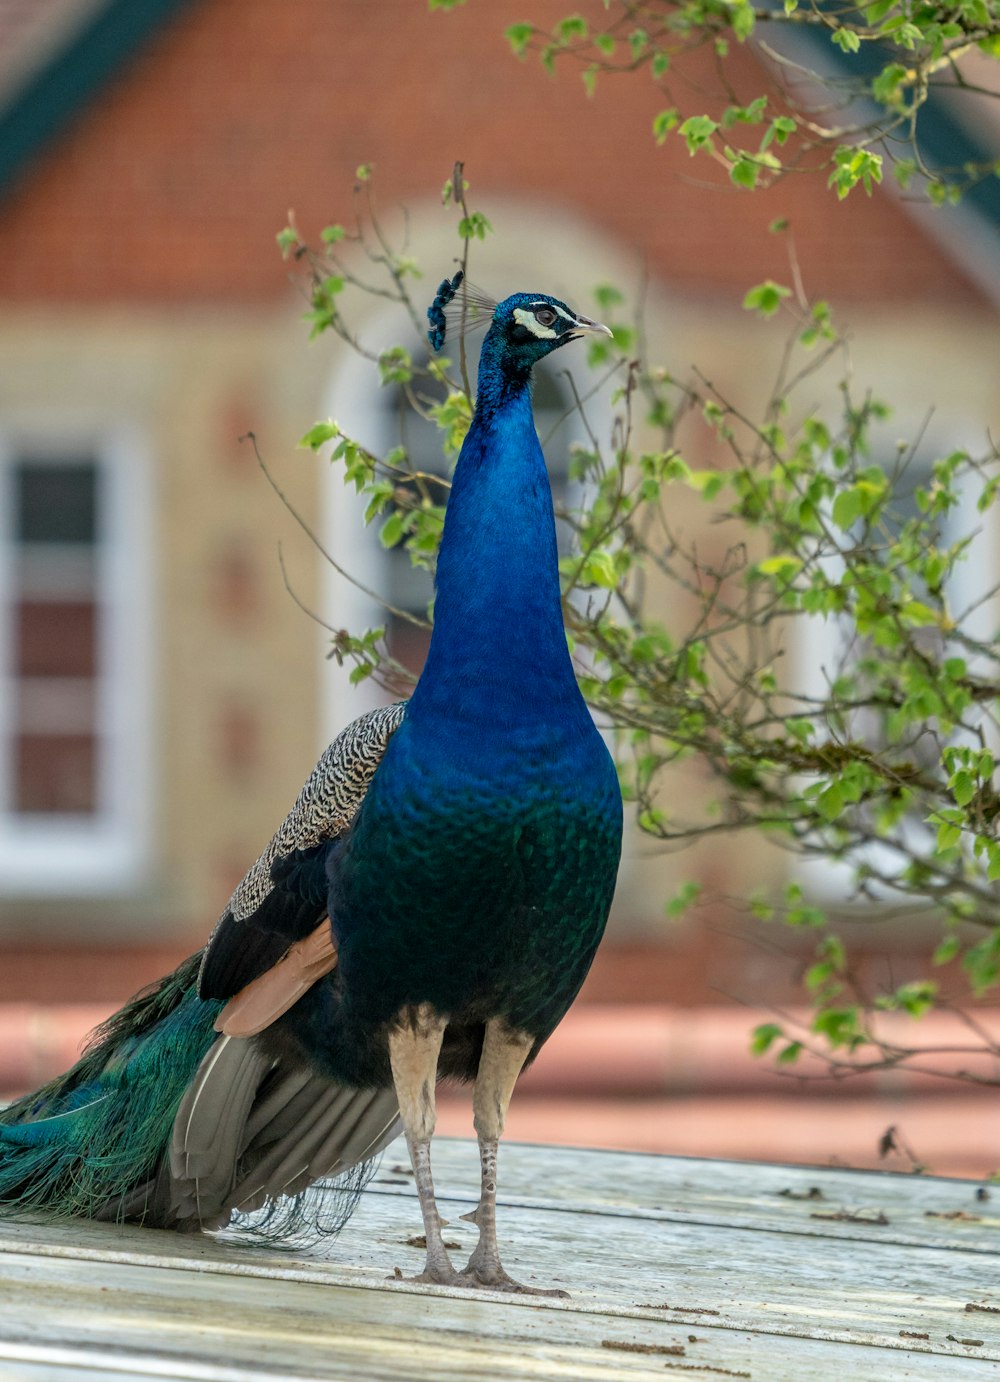 a peacock standing on a wooden deck next to a tree